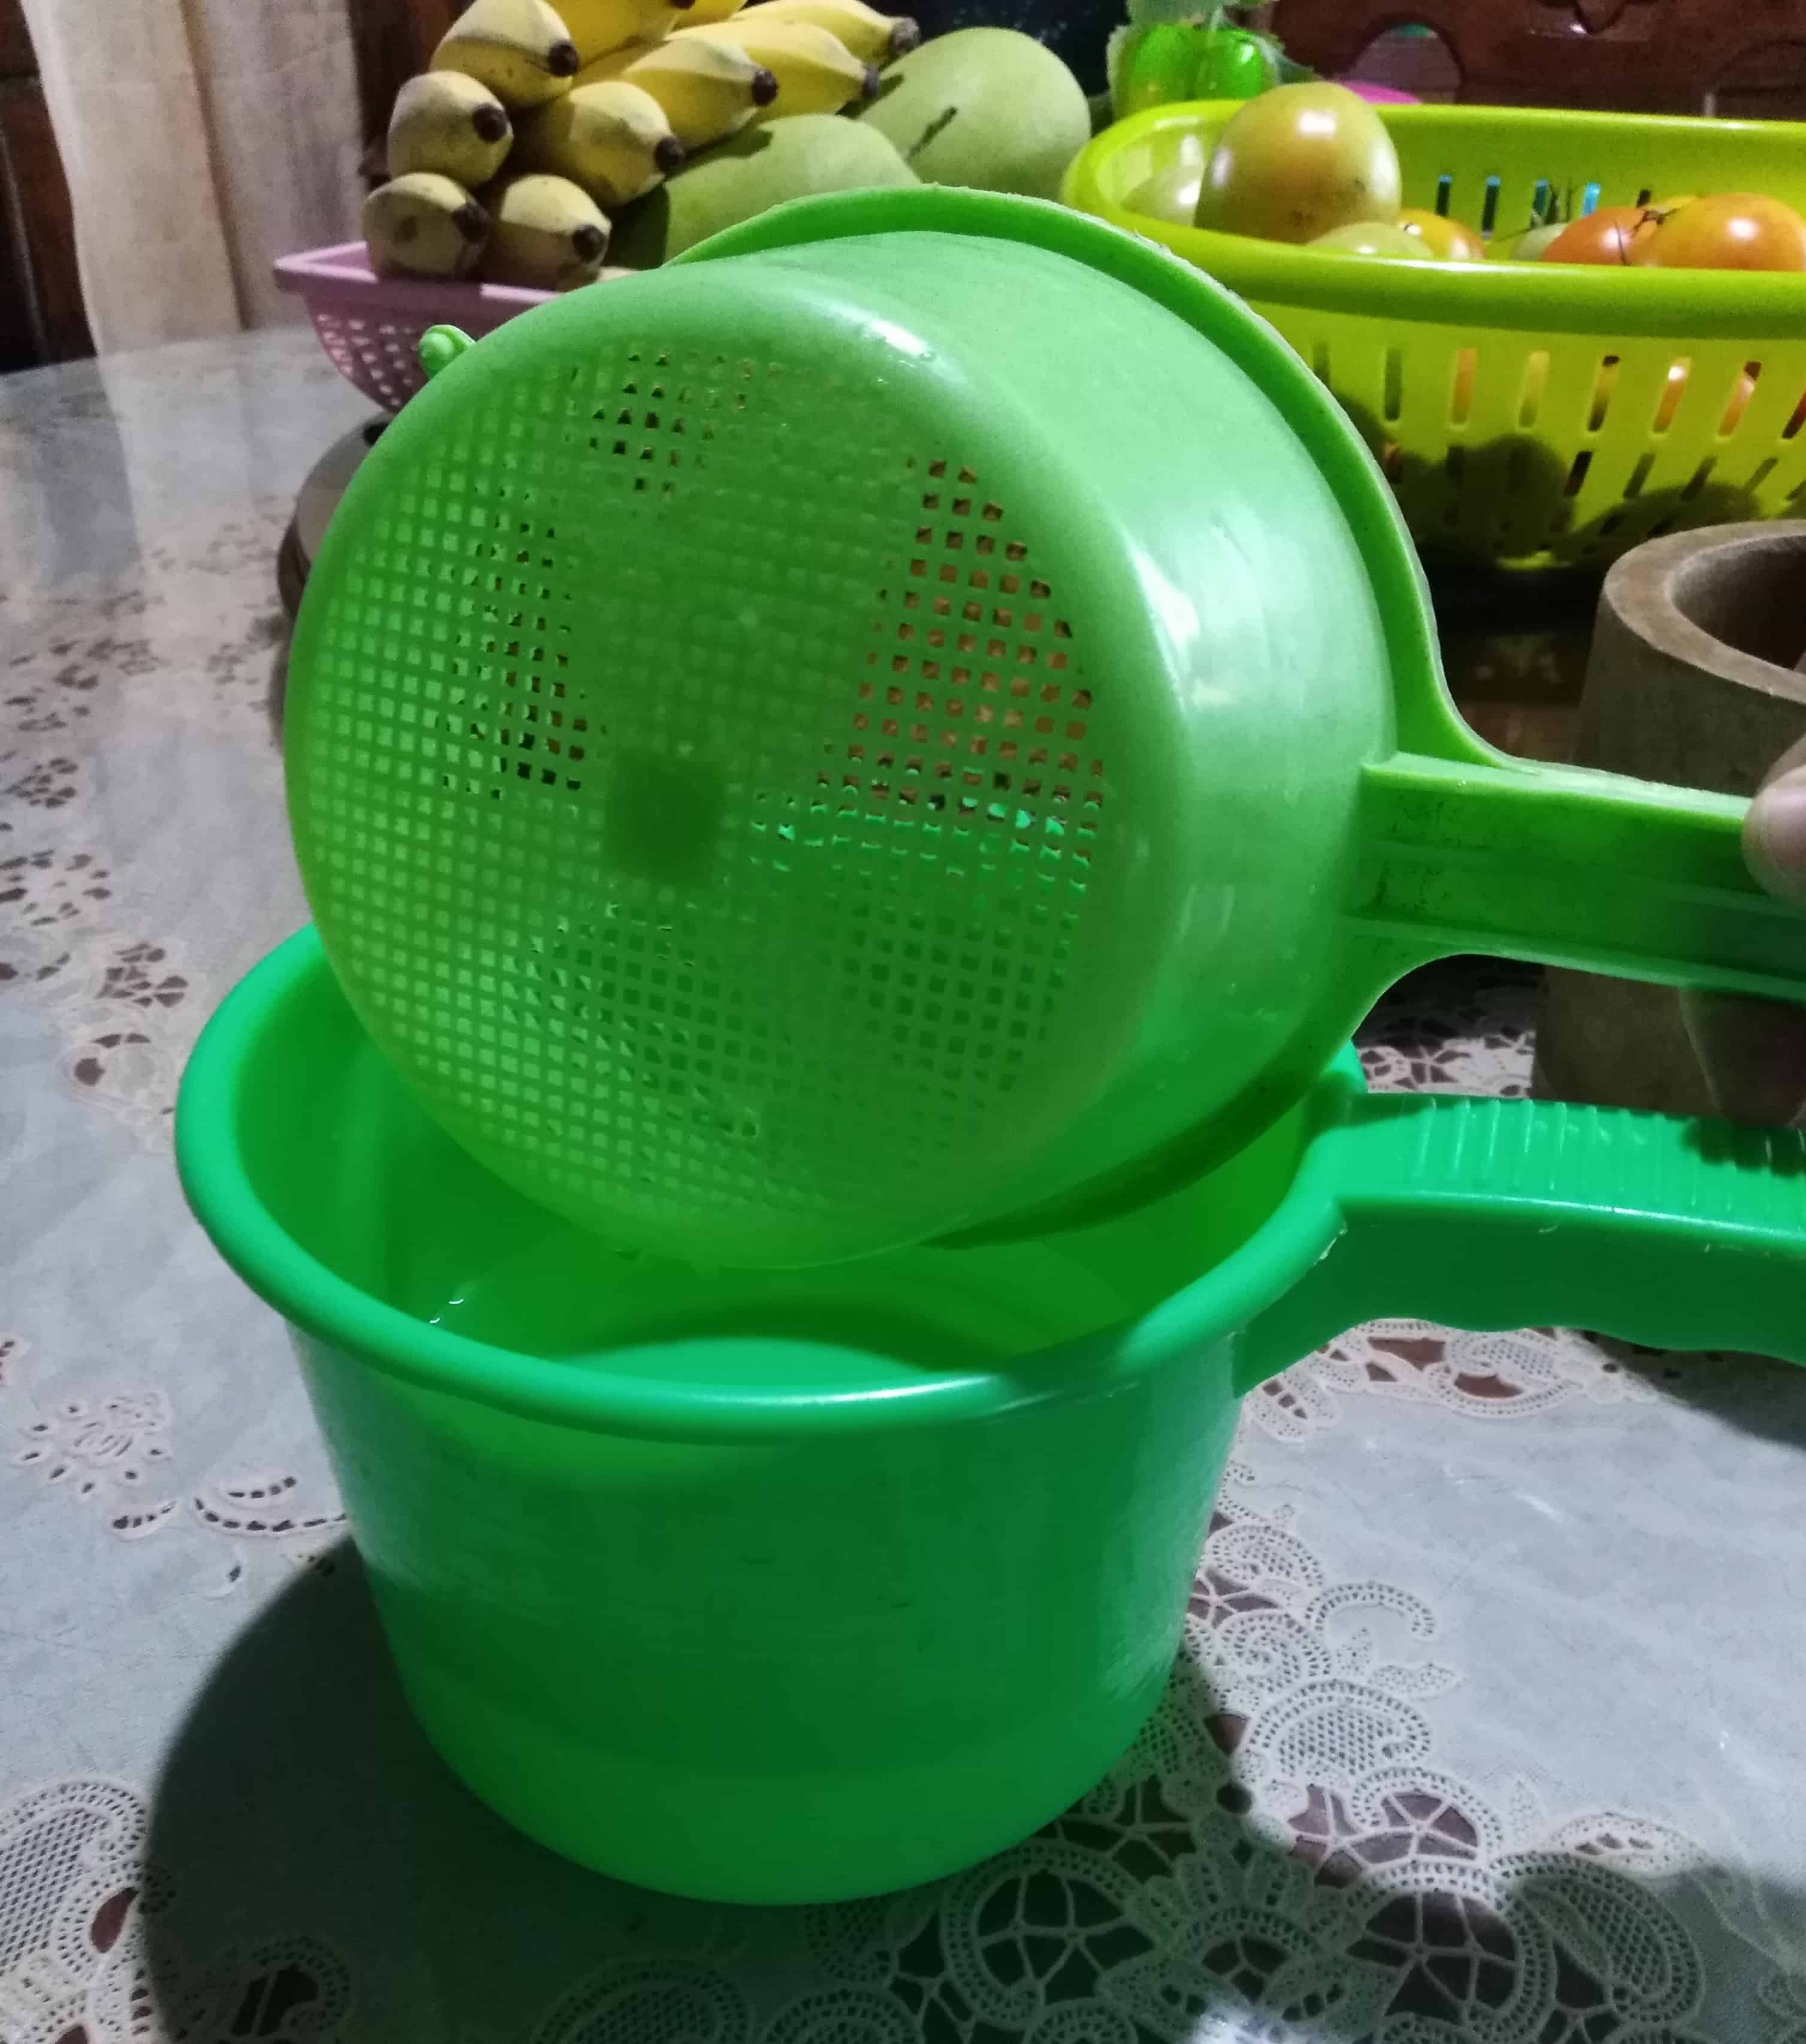 A small green colander placed on top of a green dipper/ladle/water scooper